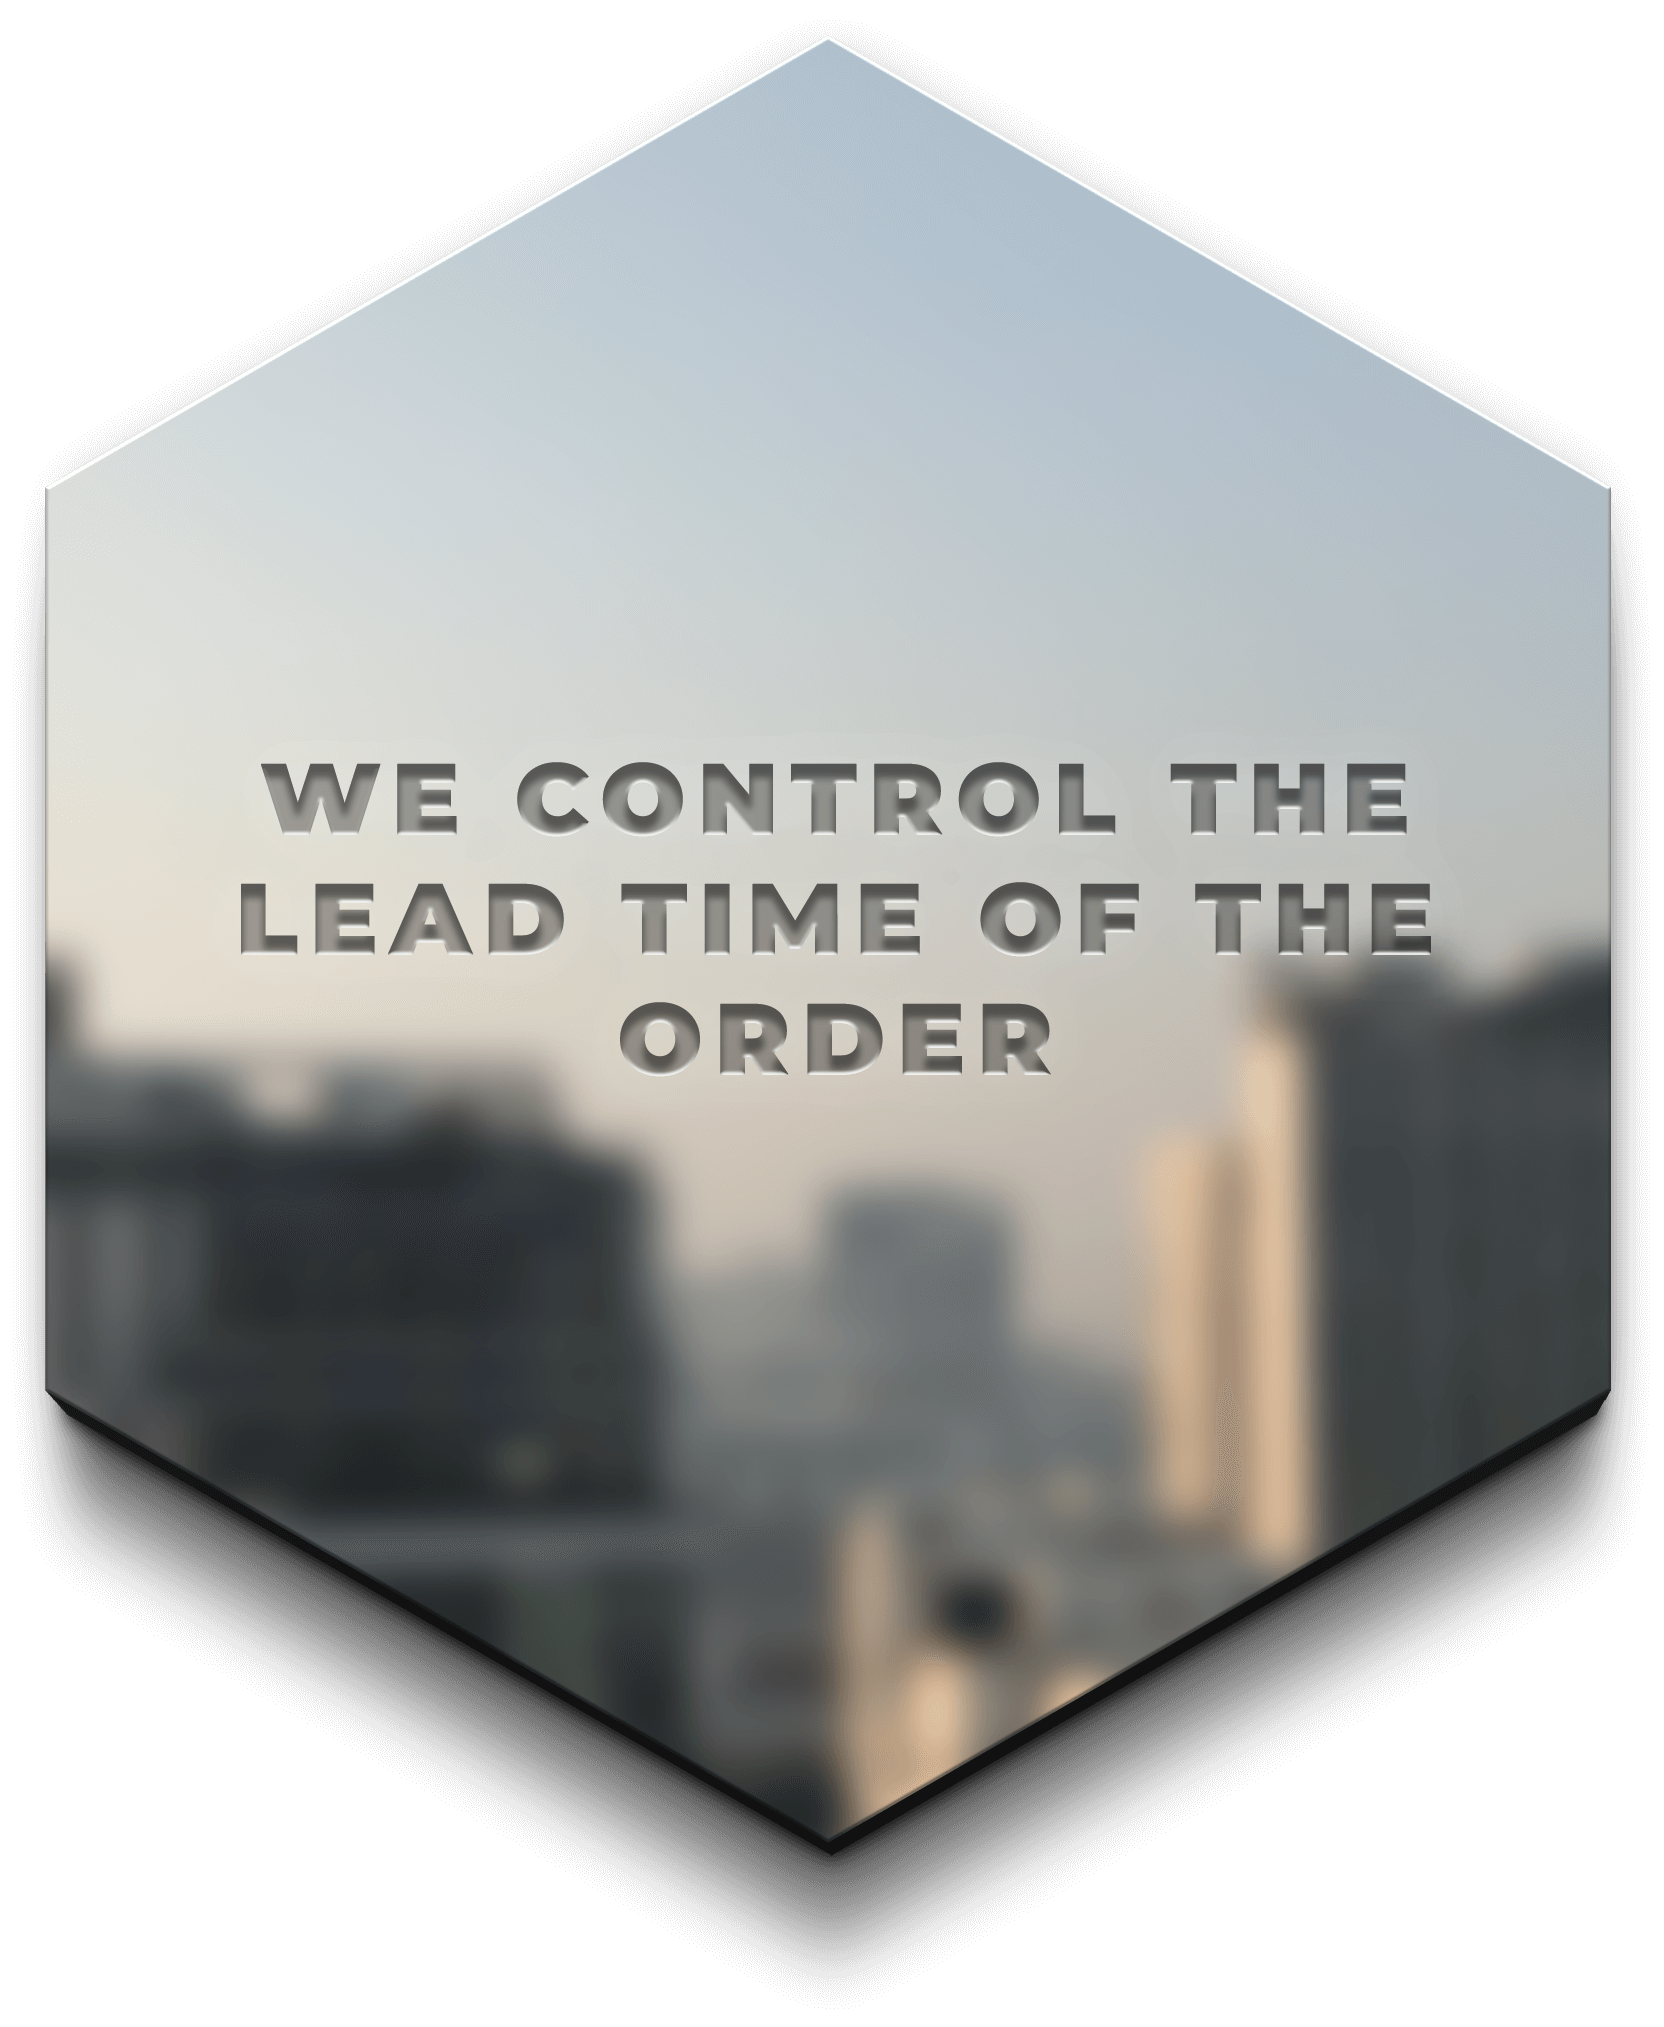 We control the lead time of the order